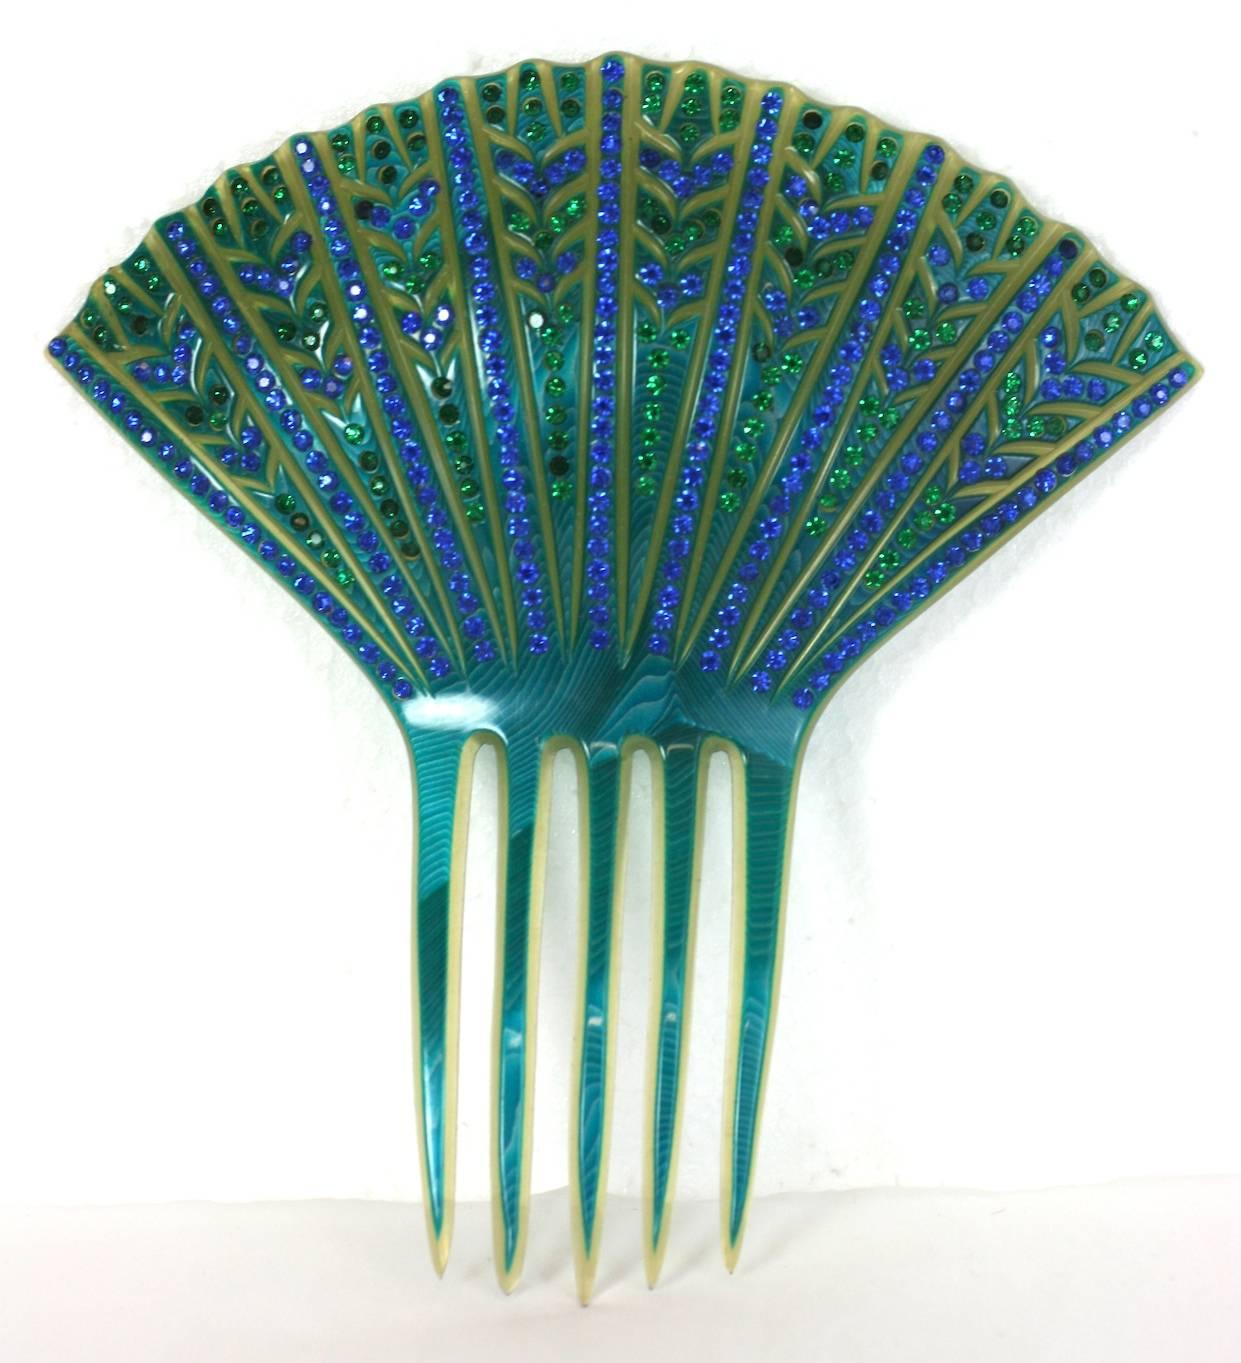 Fine French Art Deco Paste Comb made in France in the 1930's. Clear celluloid  is overlaid with a vibrant turquoise celluloid which is incised and carved away, then hand set with pave rhinestones in blues and greens. Delicate yet elaborate Art Deco